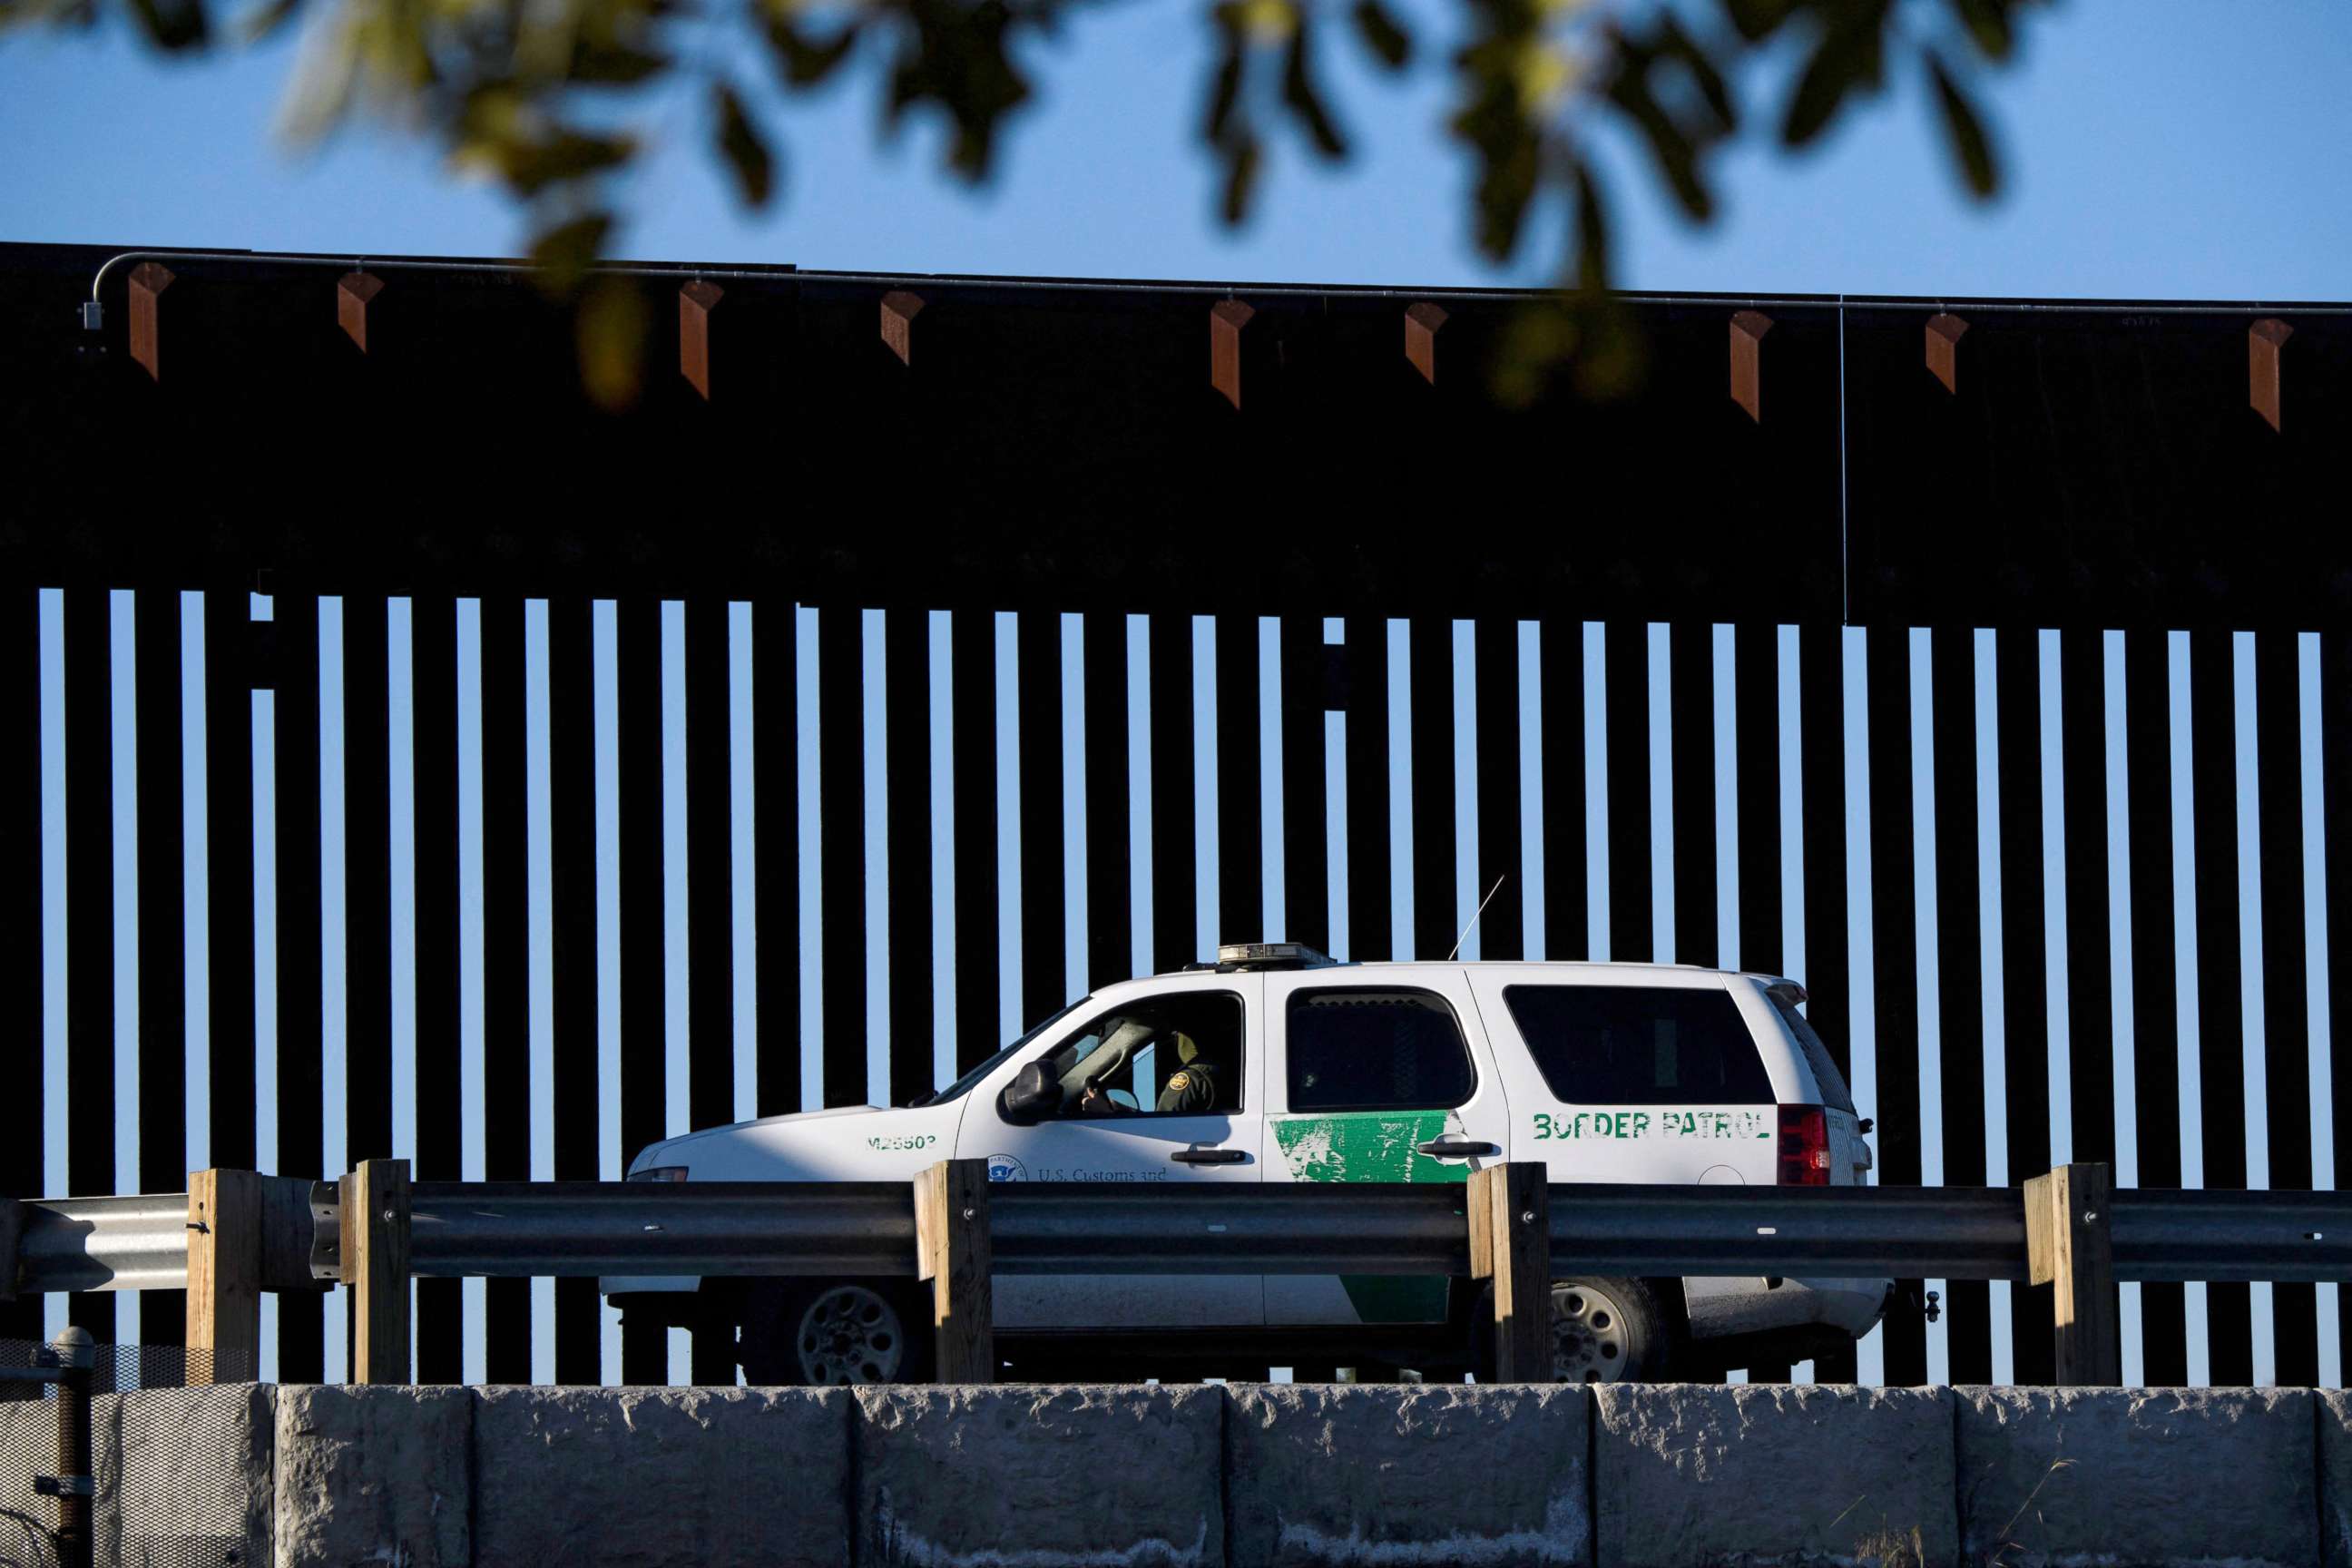 PHOTO: A US Border Patrol agent sits in a vehicle along a border wall near the US Customs and Border Protection (CBP) San Ysidro Port of Entry at the US Mexico border, Feb. 19, 2021, in San Diego, California.